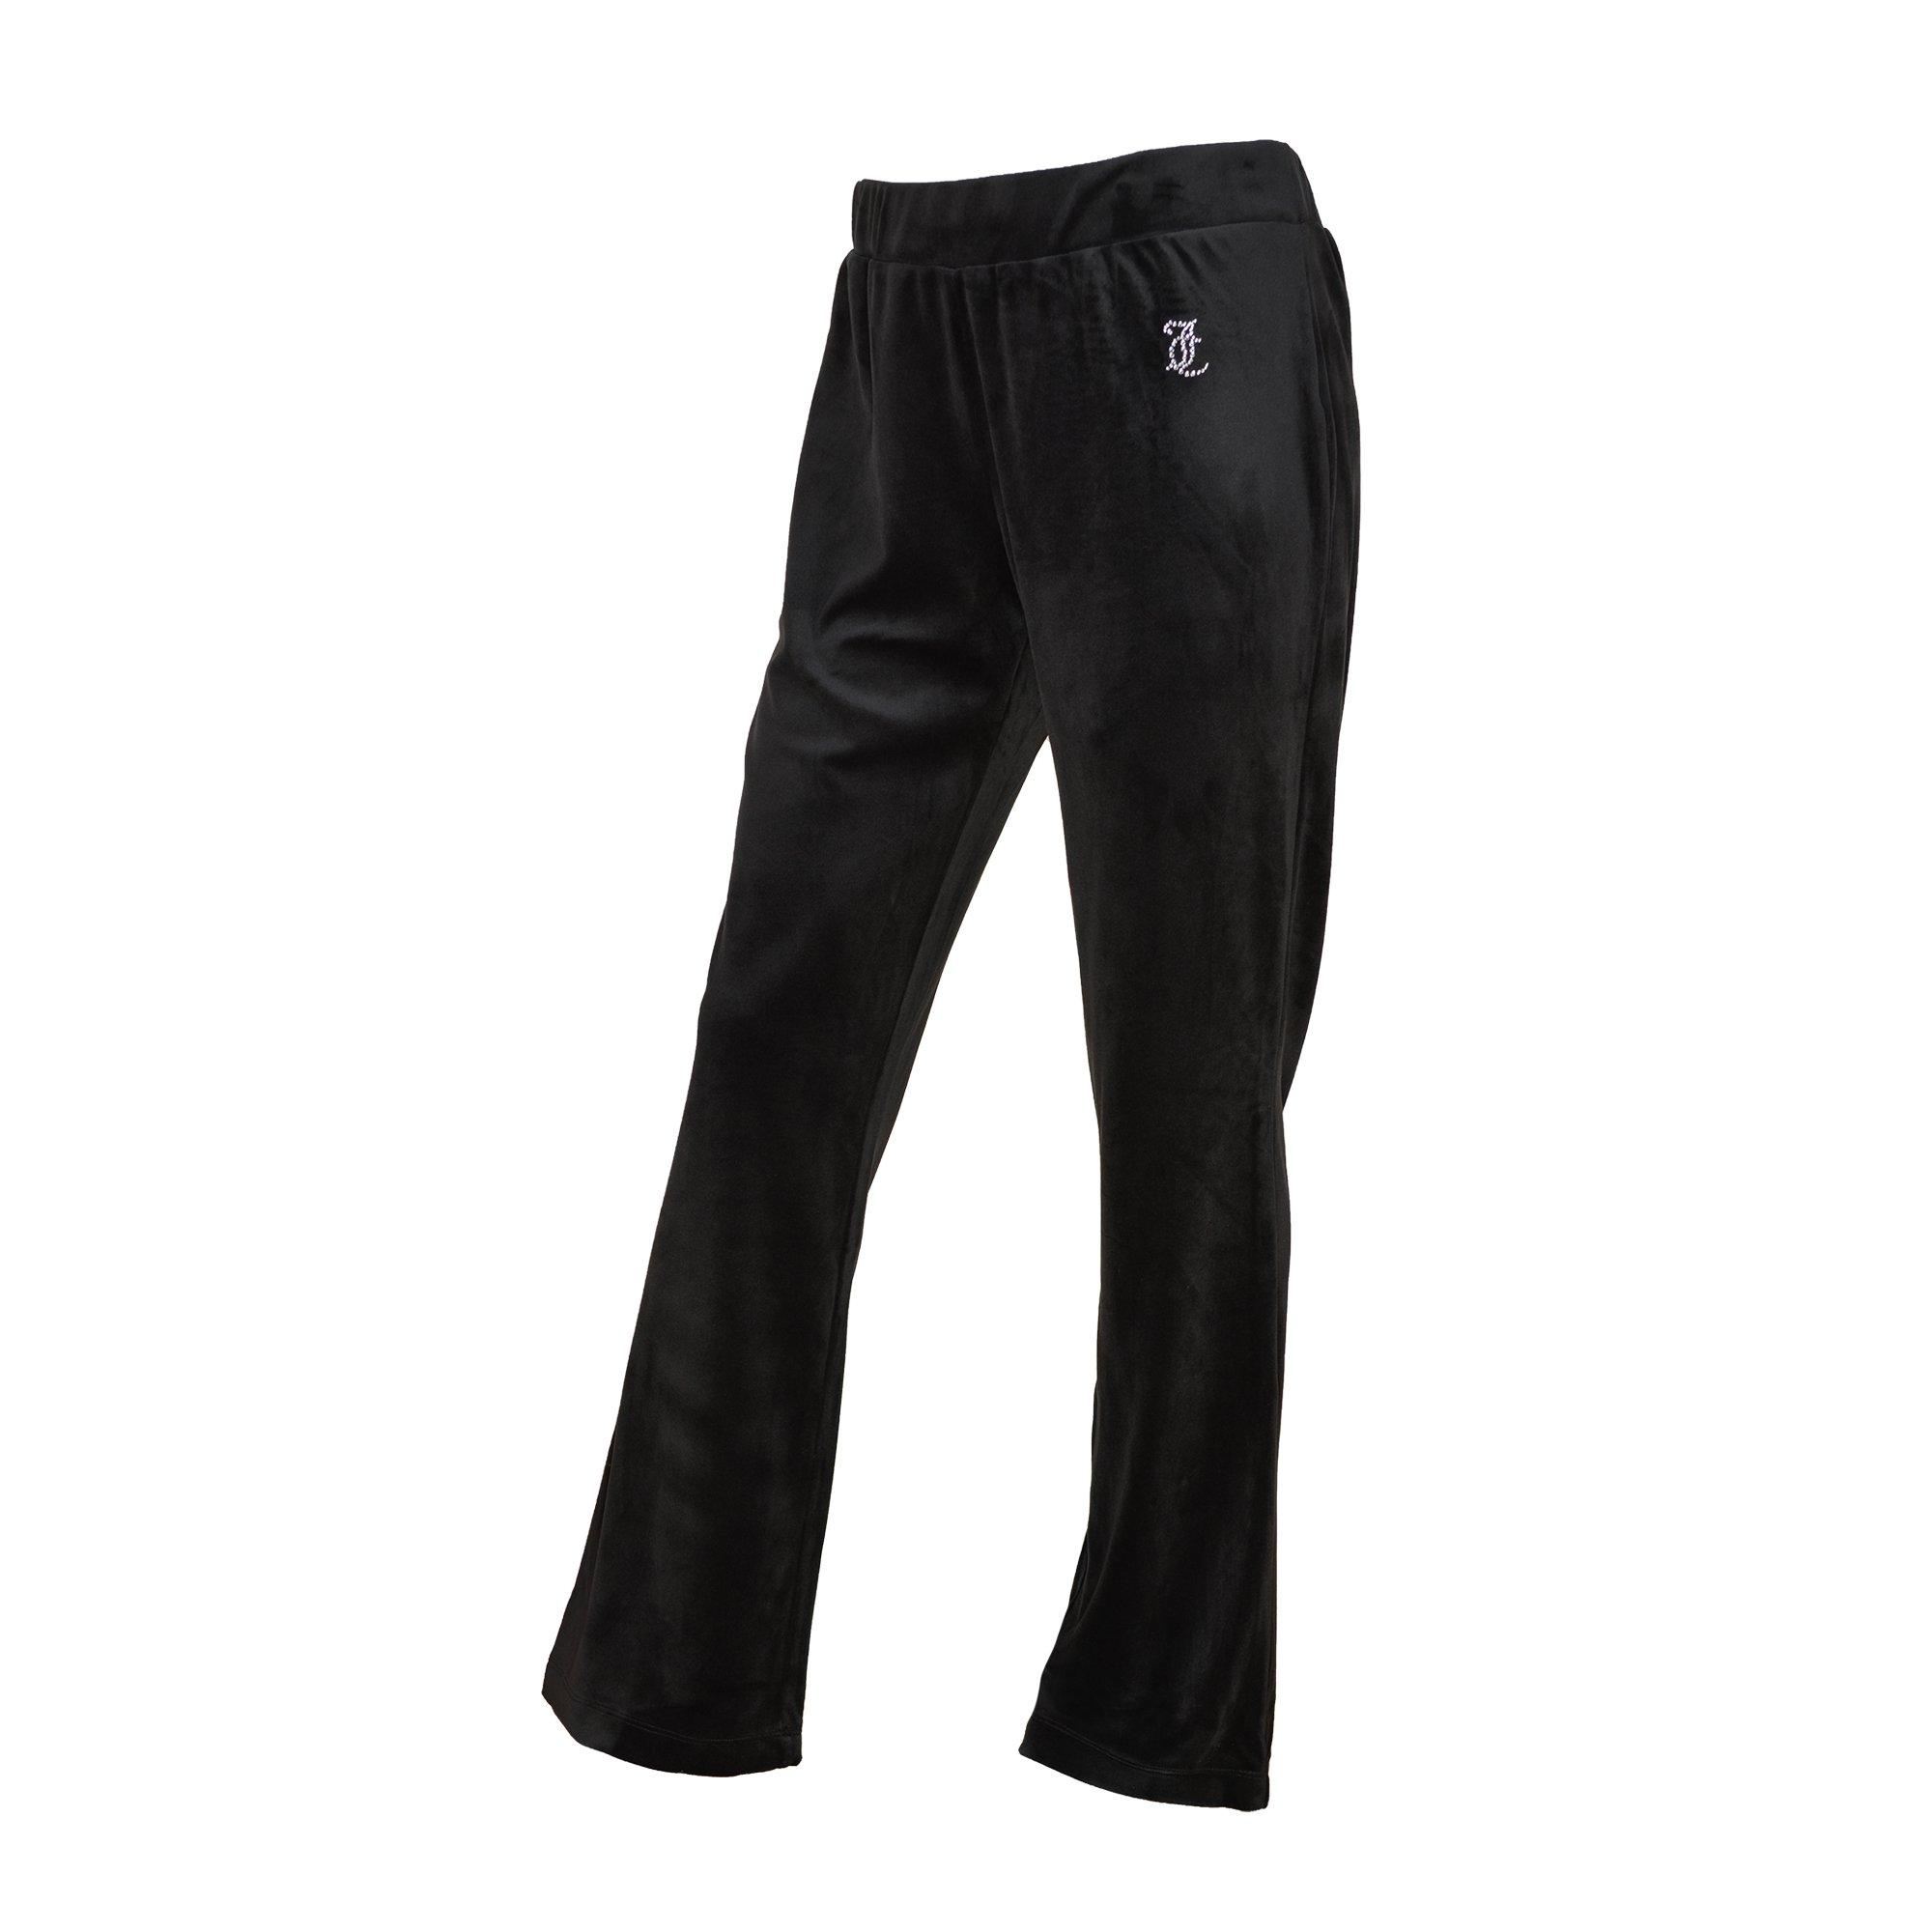 Juicy Couture Sport Sports tights for women, Buy online